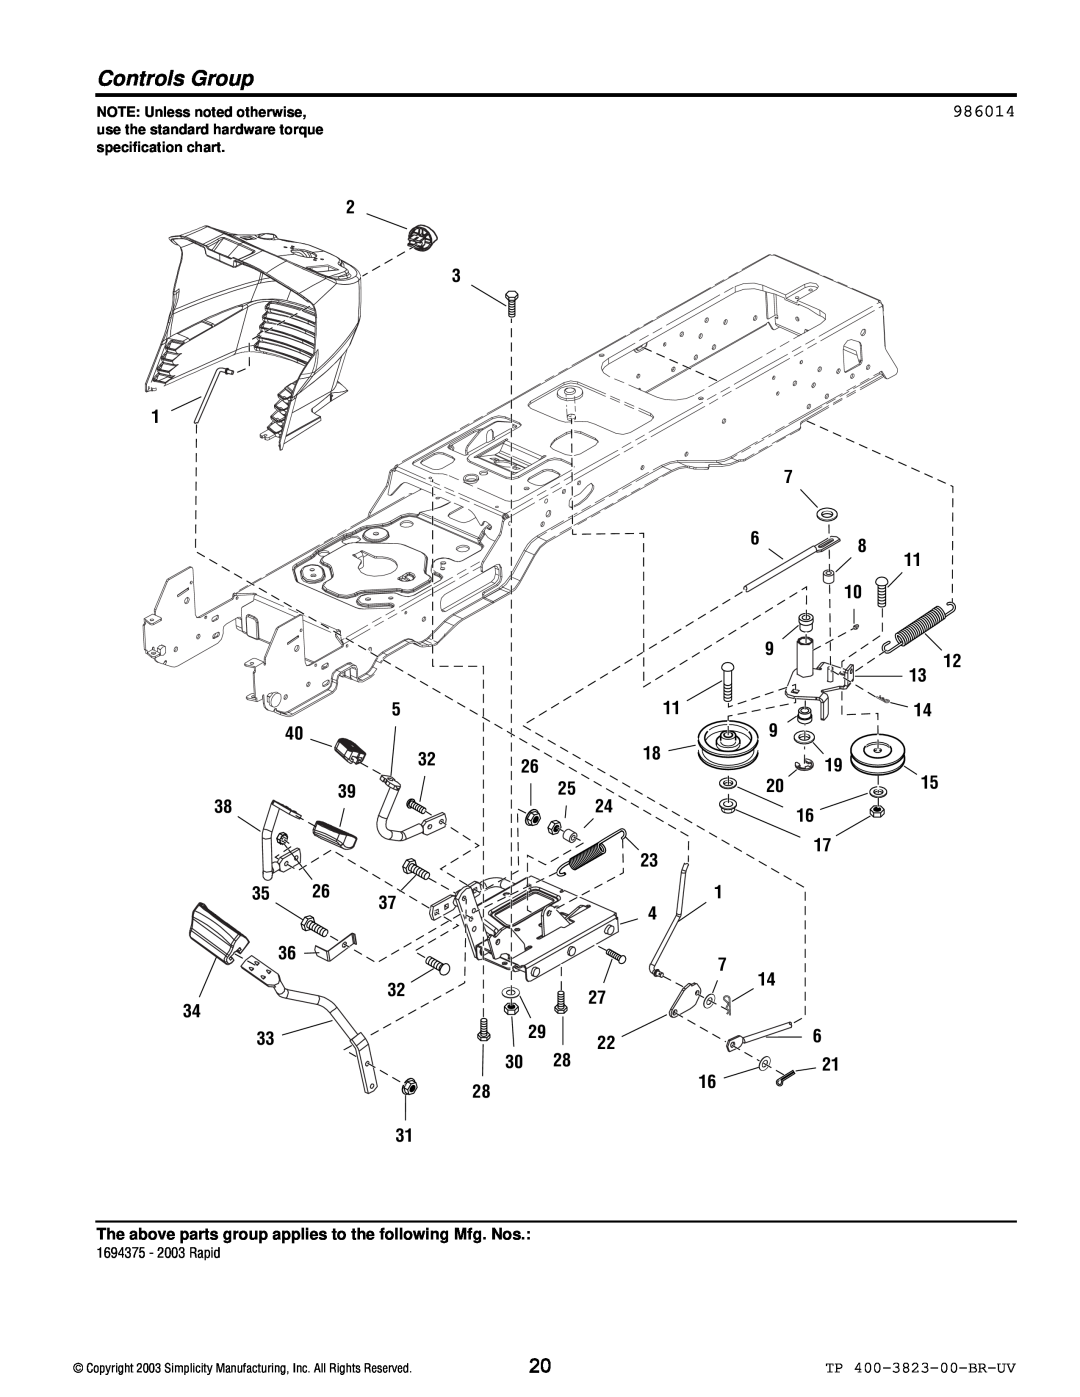 Simplicity 2003 Rapid manual Controls Group, 986014, The above parts group applies to the following Mfg. Nos 